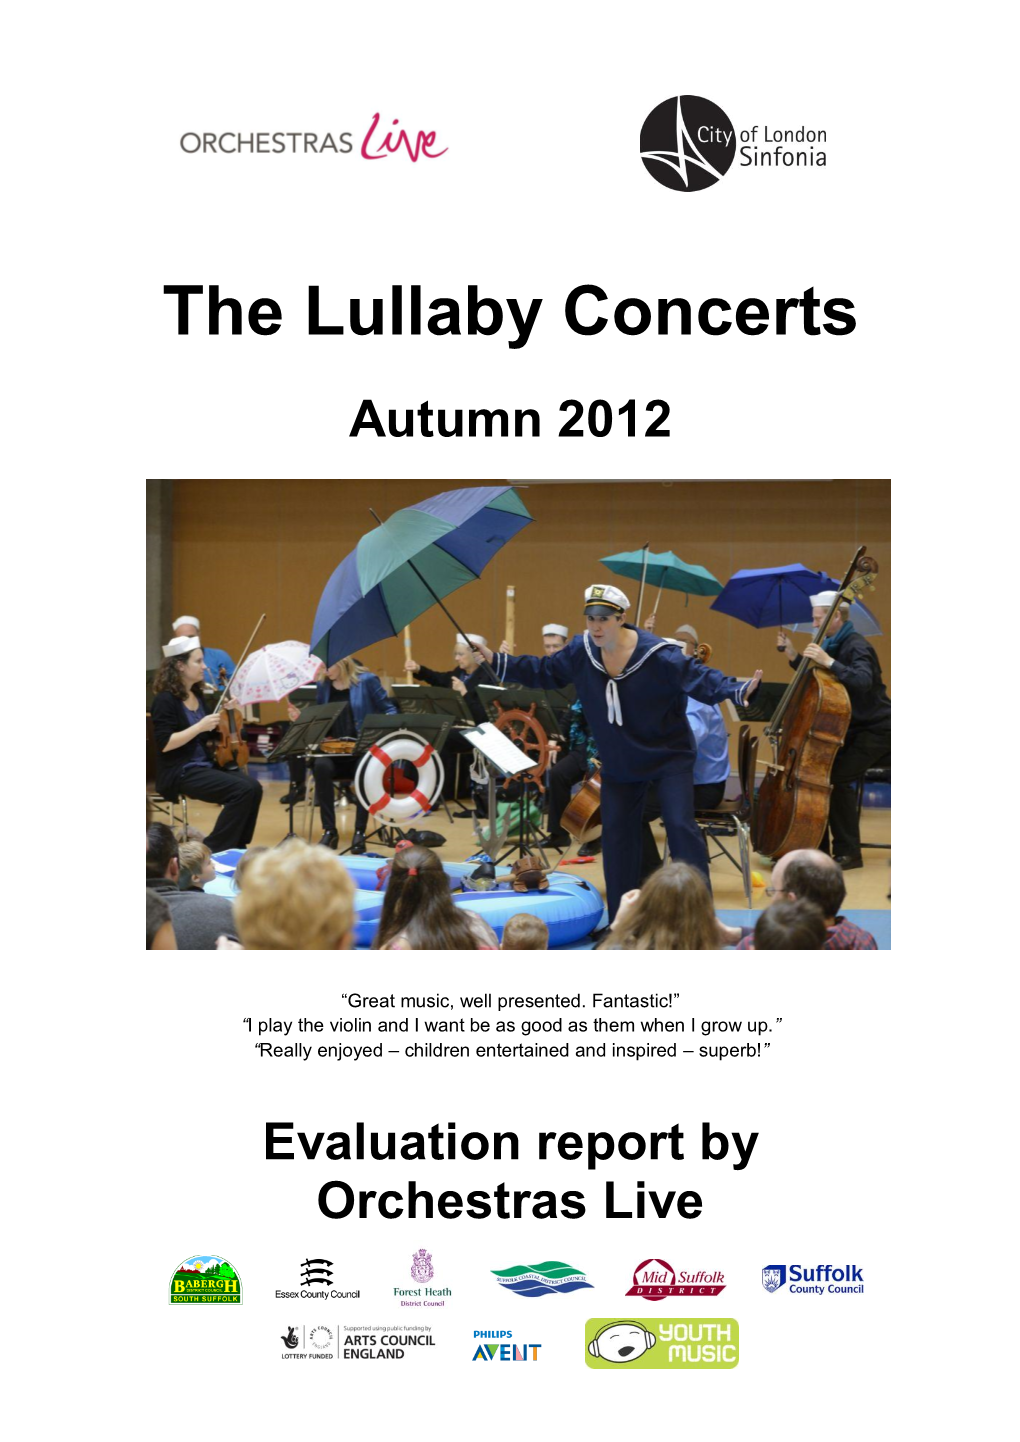 The Lullaby Concerts